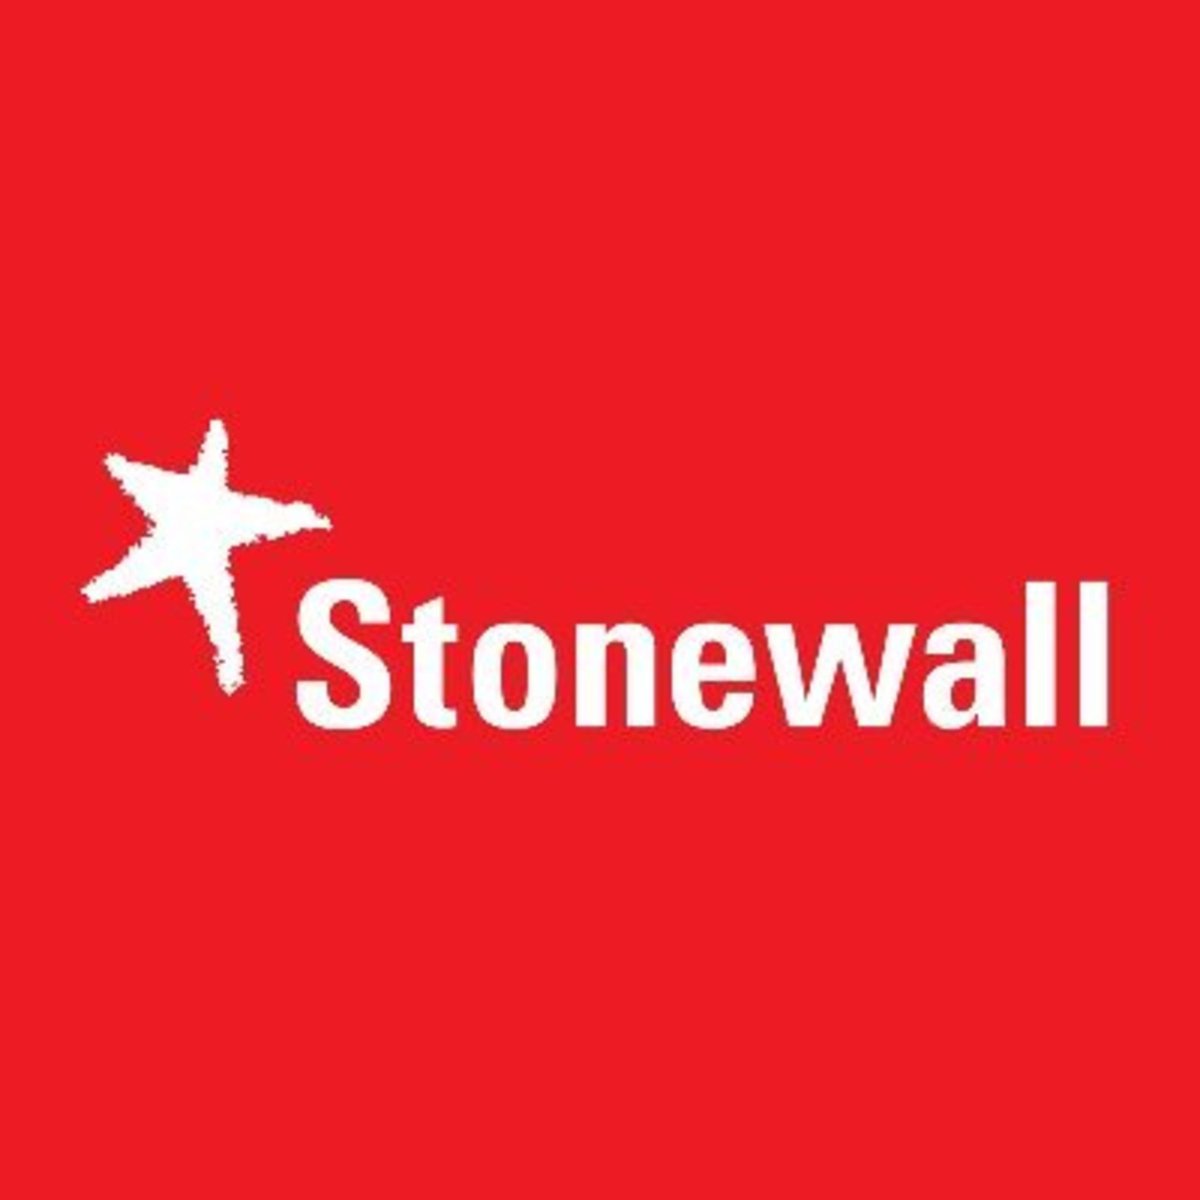  @stonewalluk signed our open letter against the Nordic Model Stonewall is the largest LGBT rights organisation in Europe campaigning for the equality of lesbian, gay, bi and trans people across Britain and abroad. Read the letter here  https://decrimnow.org.uk/open-letter-on-the-nordic-model/  #notonordicmodel